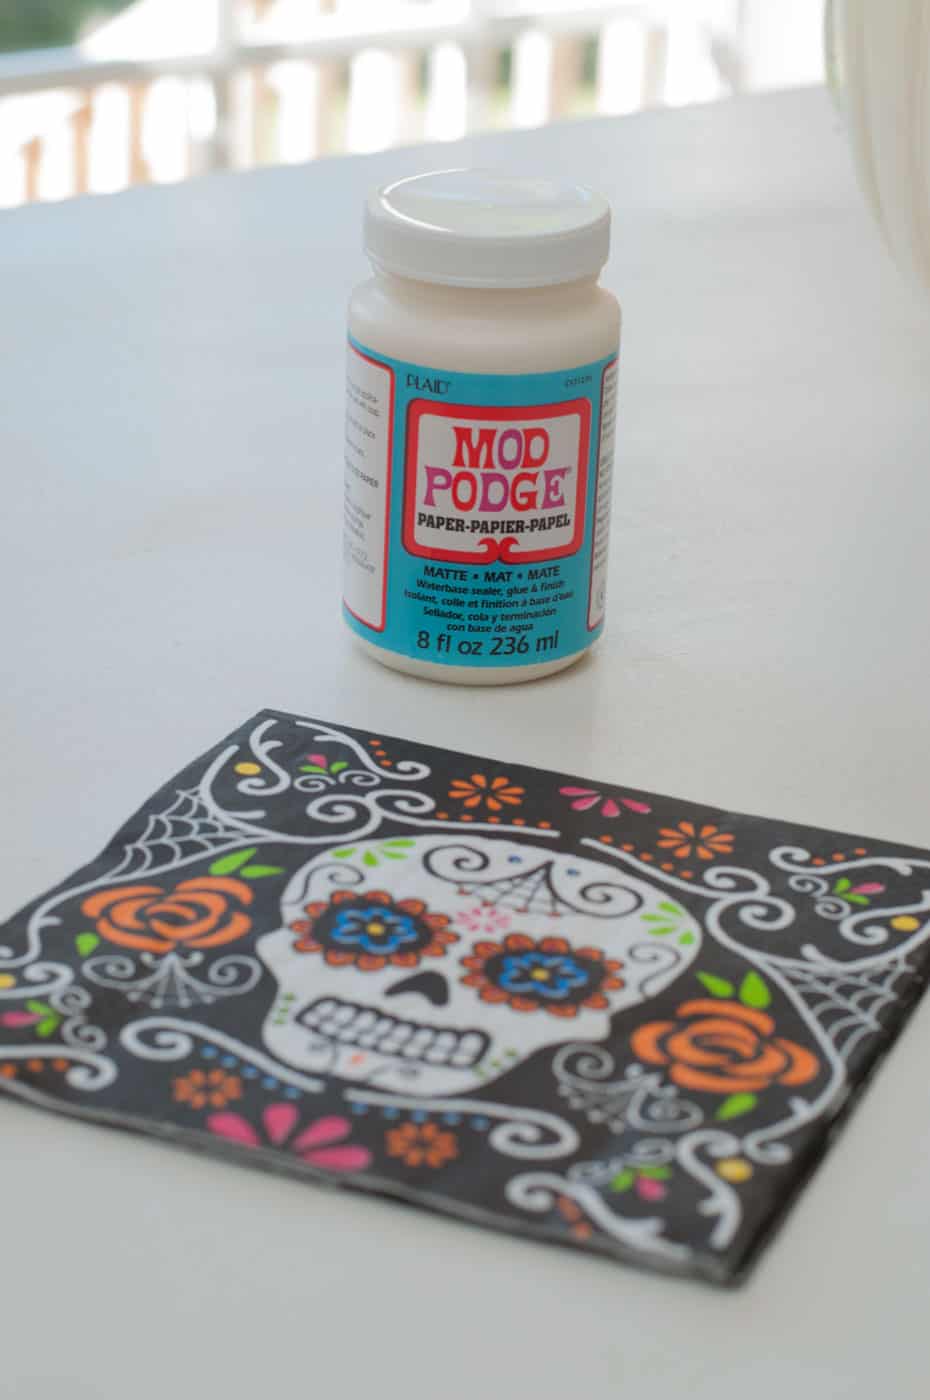 Paper Mod Podge and Day of the Dead napkins